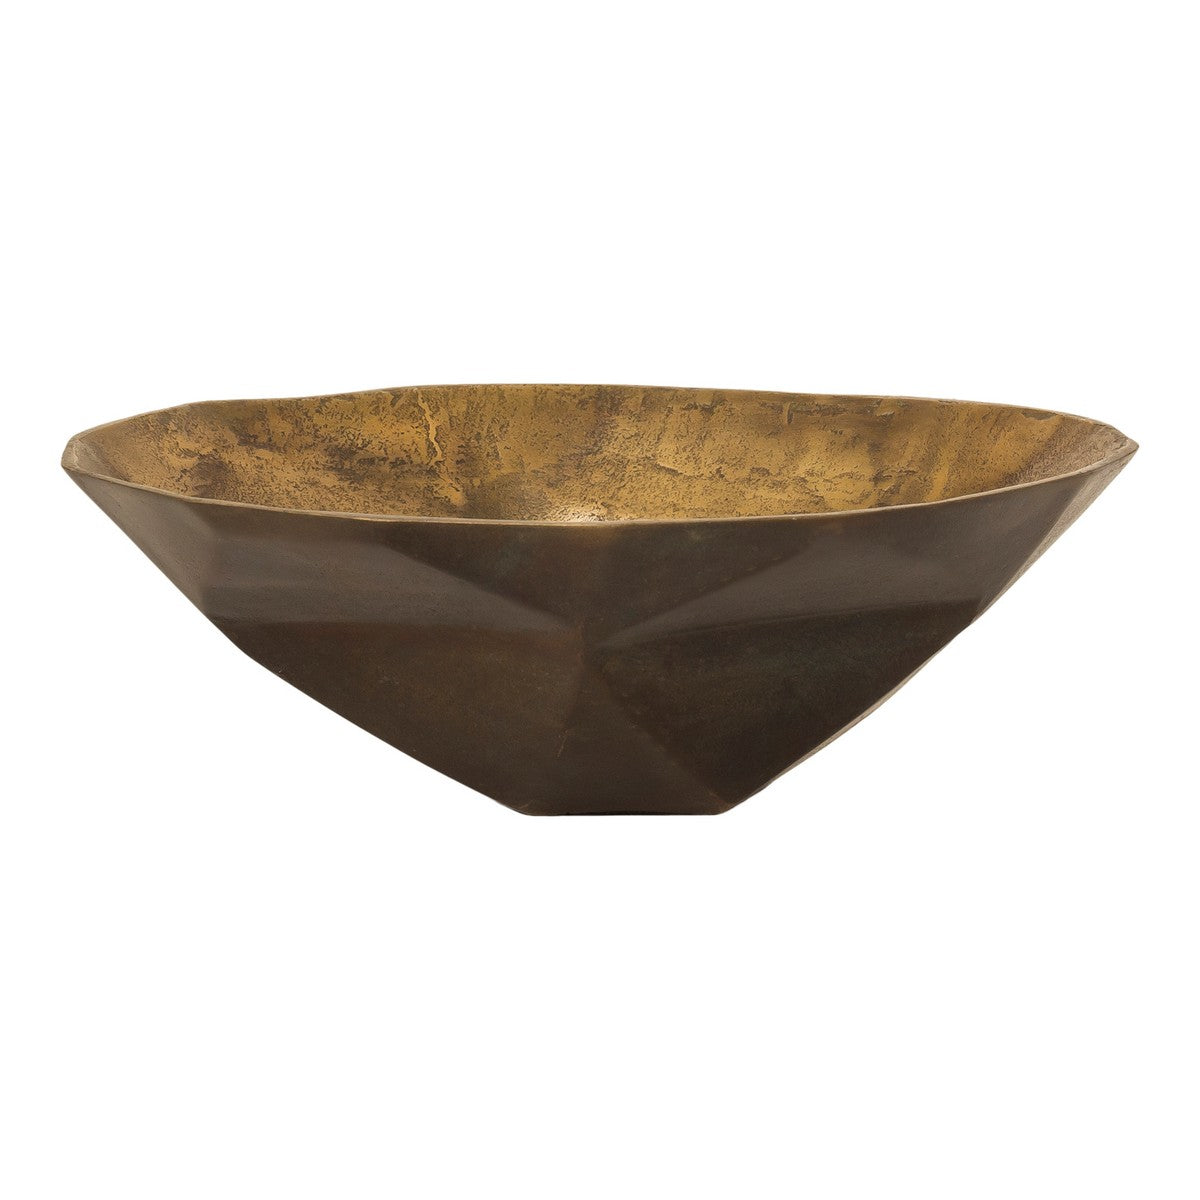 Moe's Home Collection Kennedy Bowl-Set of Two - ZY-1016-26 - Moe's Home Collection - Bowls - Minimal And Modern - 1